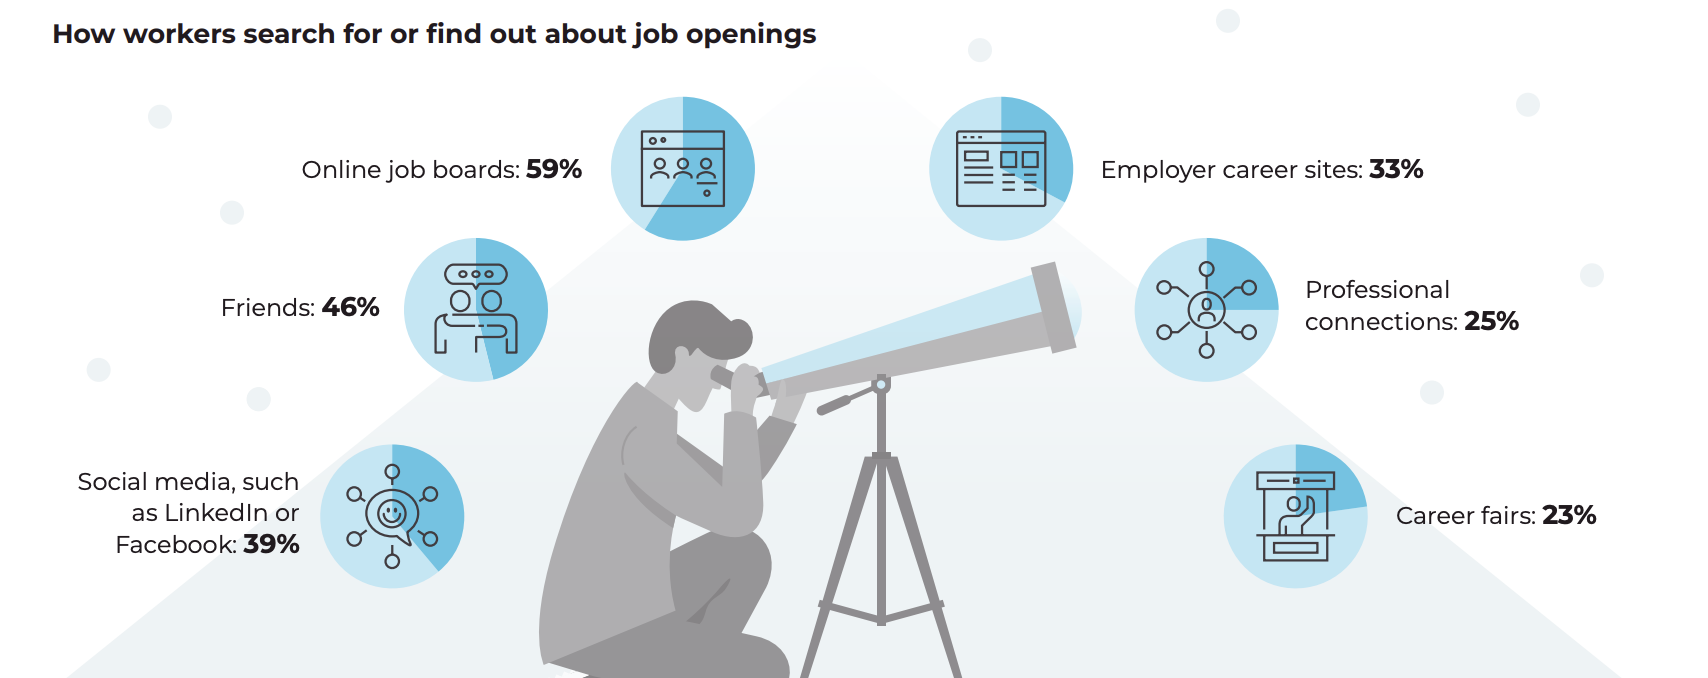 Networking statistics: how workers search for or find out about job openings